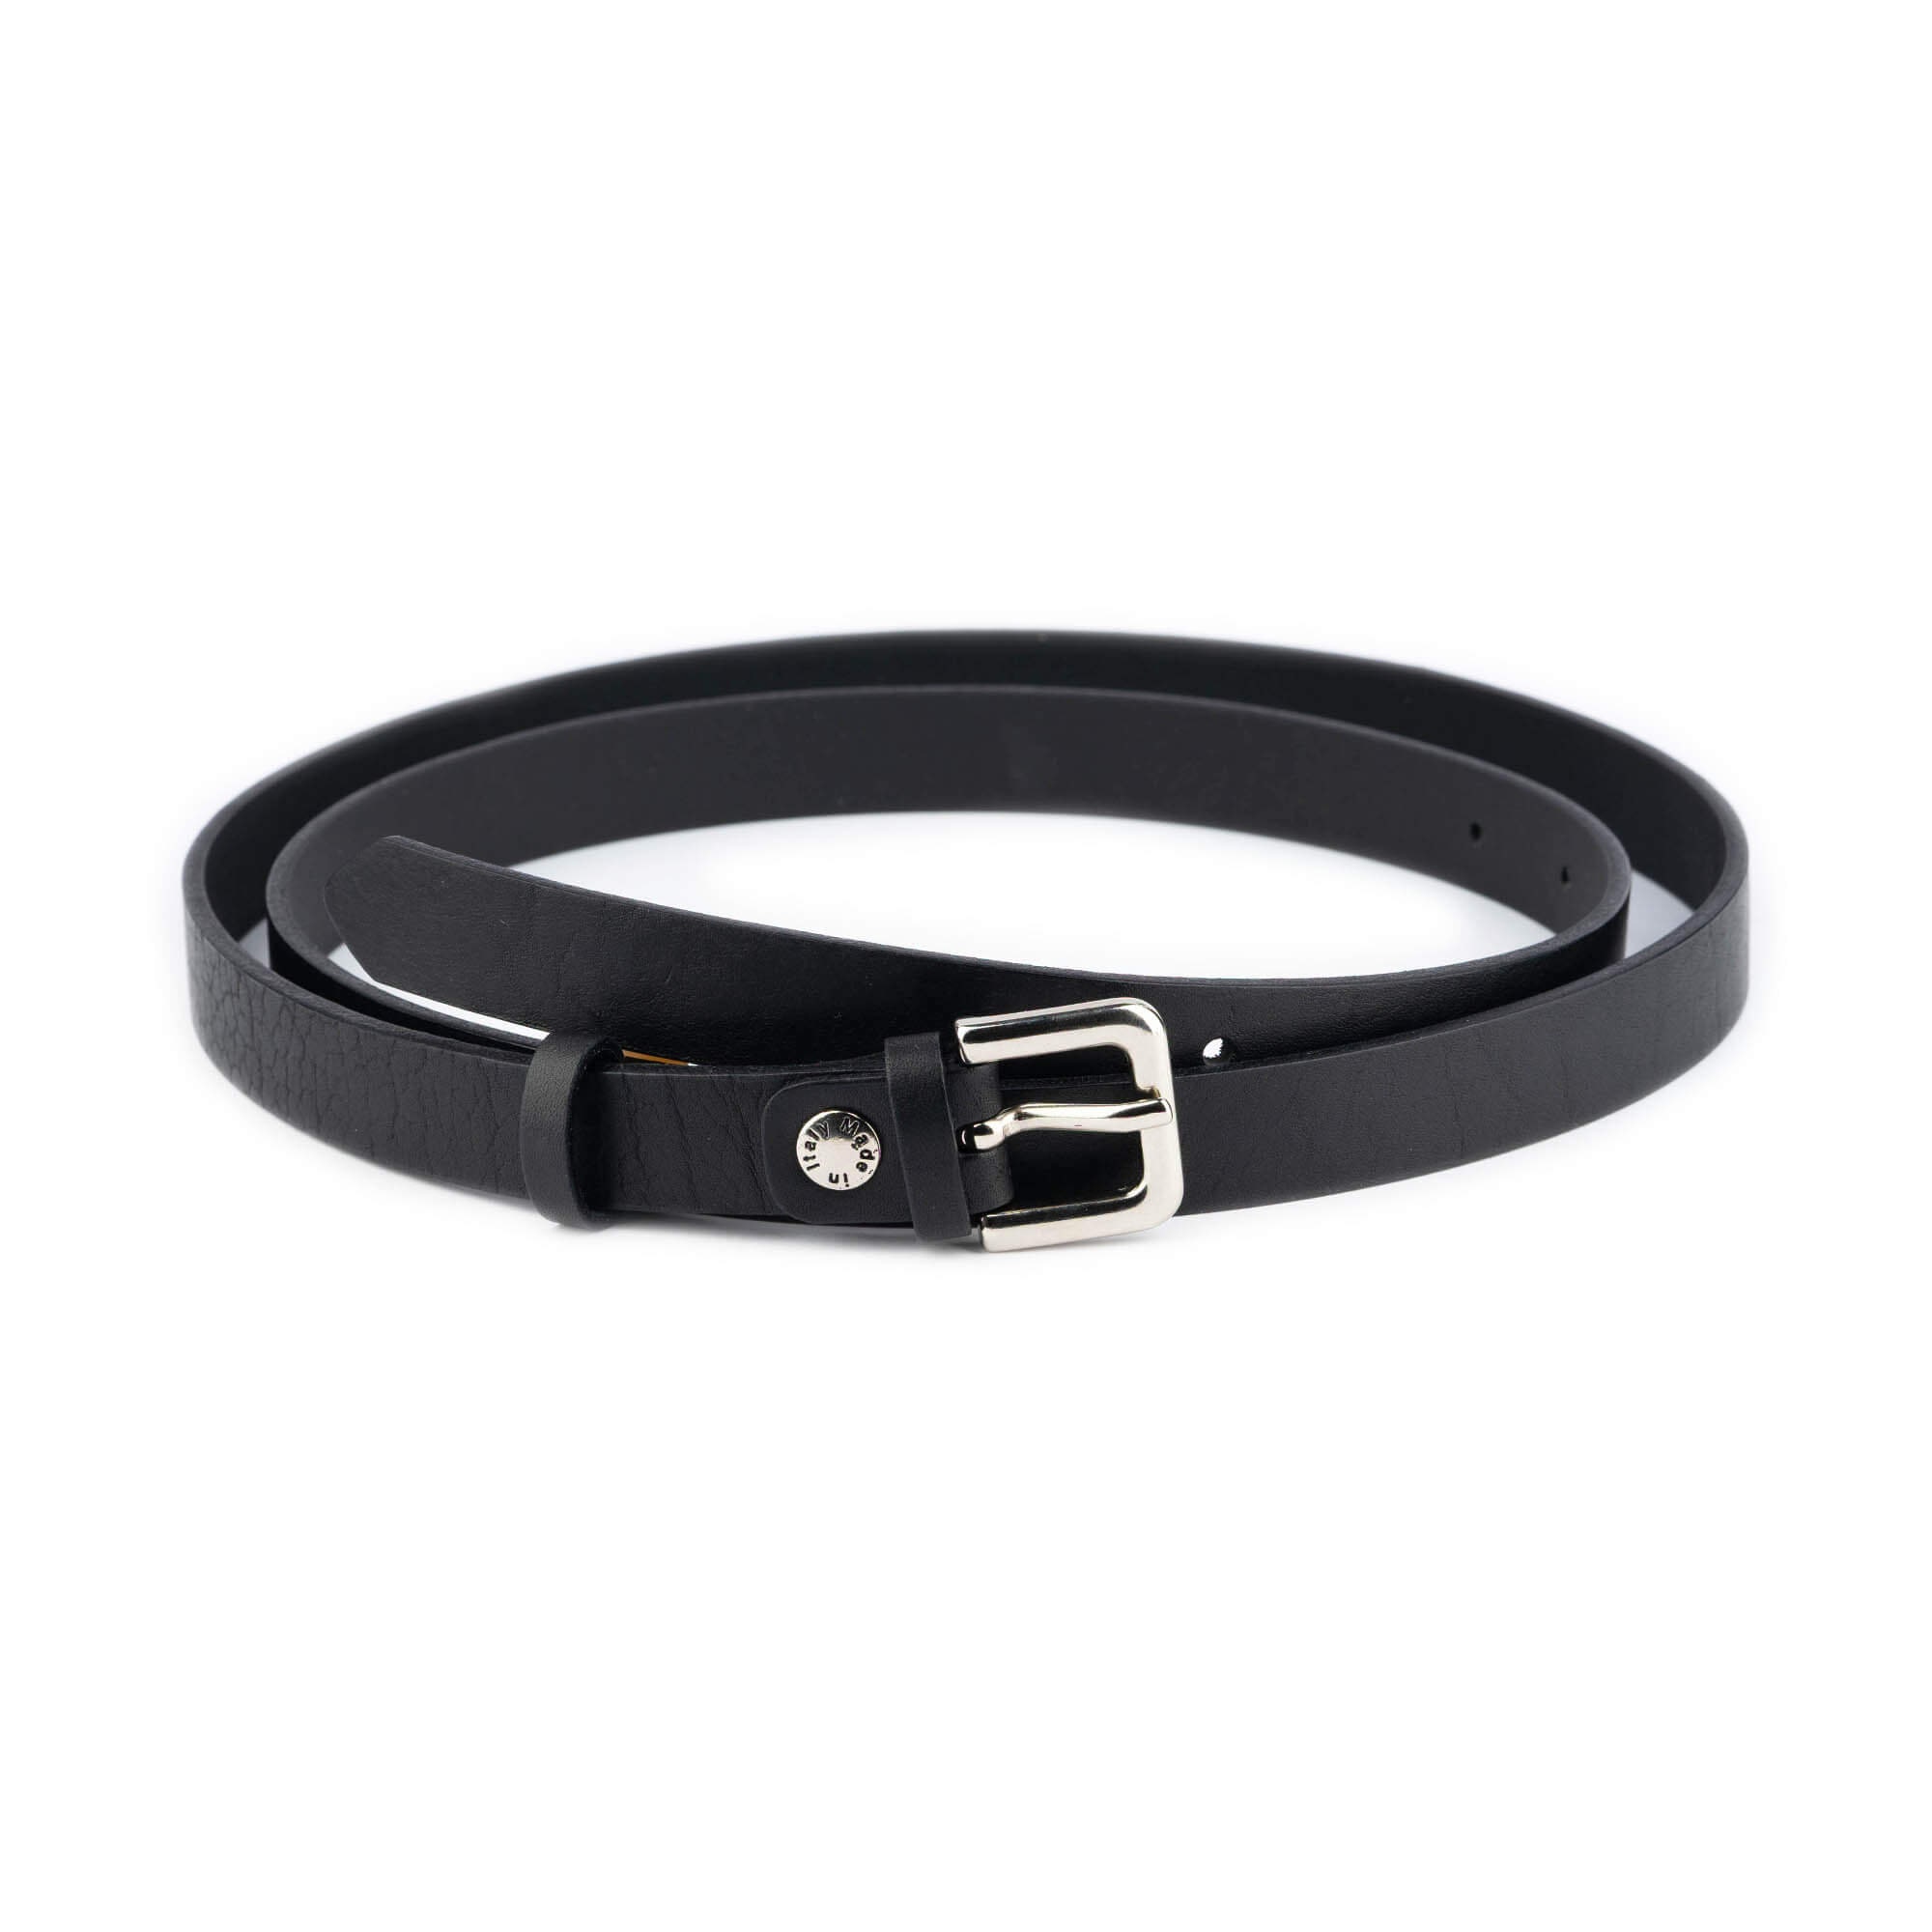 Tandy Leather Small Belt Clip 1238-24 Black Plate, Women's